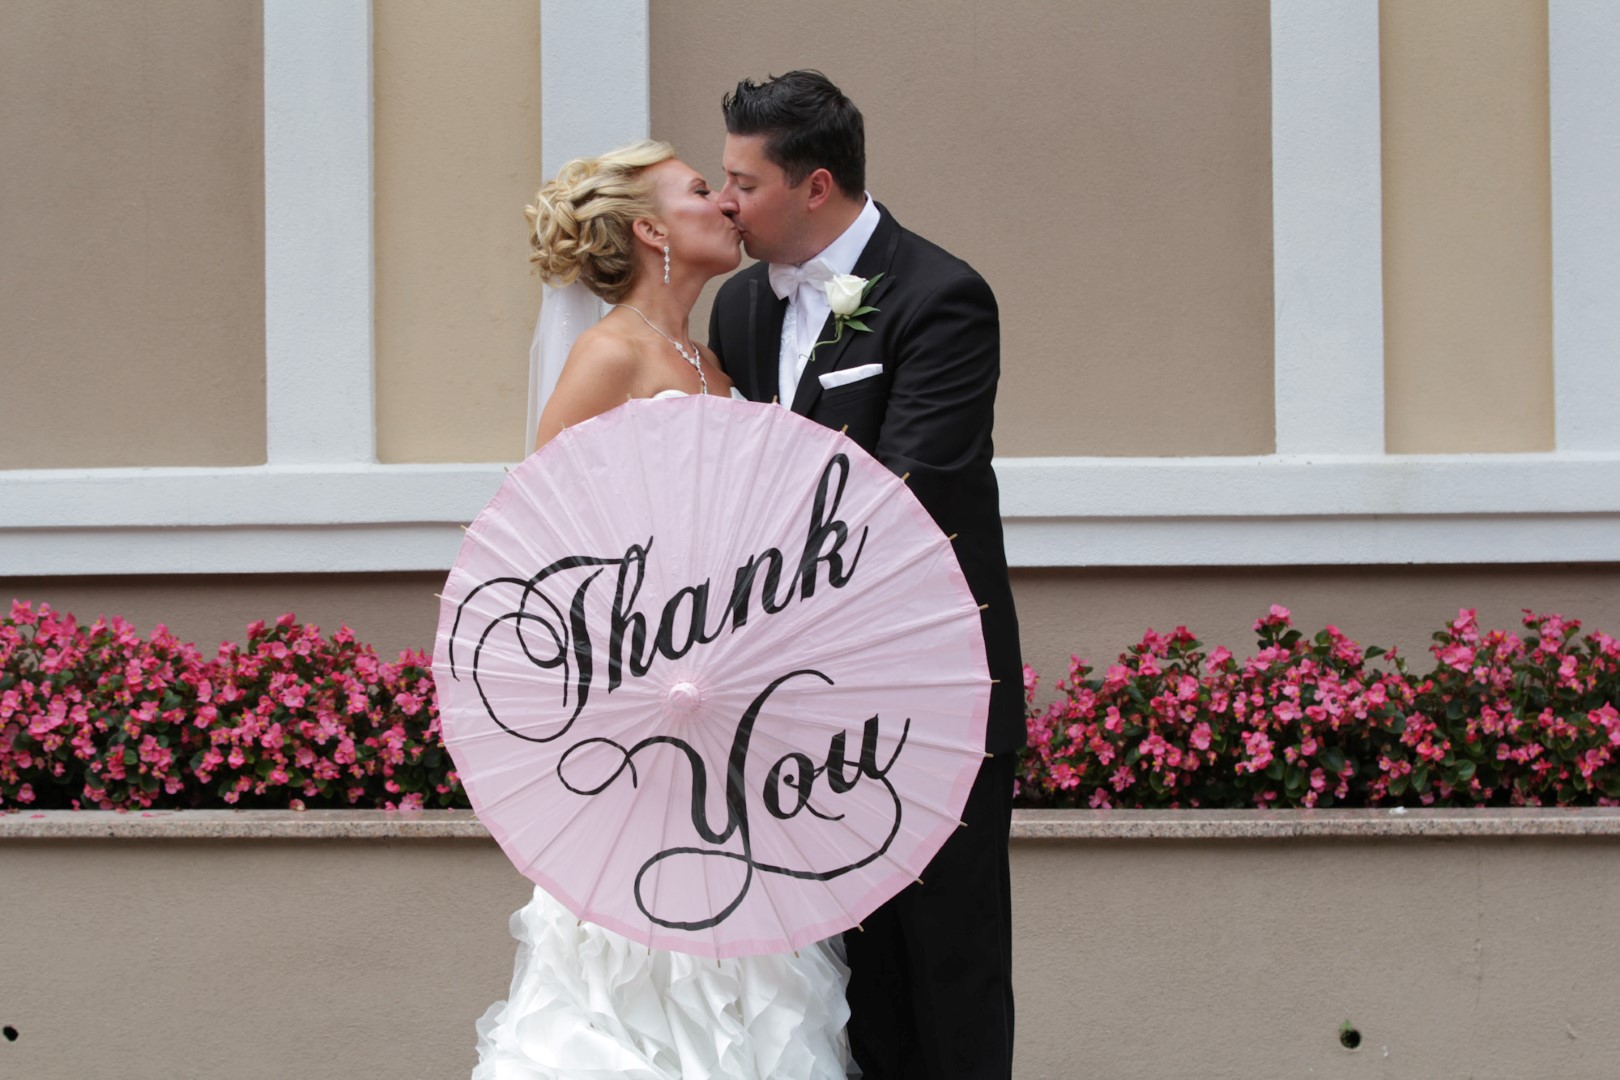 thank you - bride and groom photo